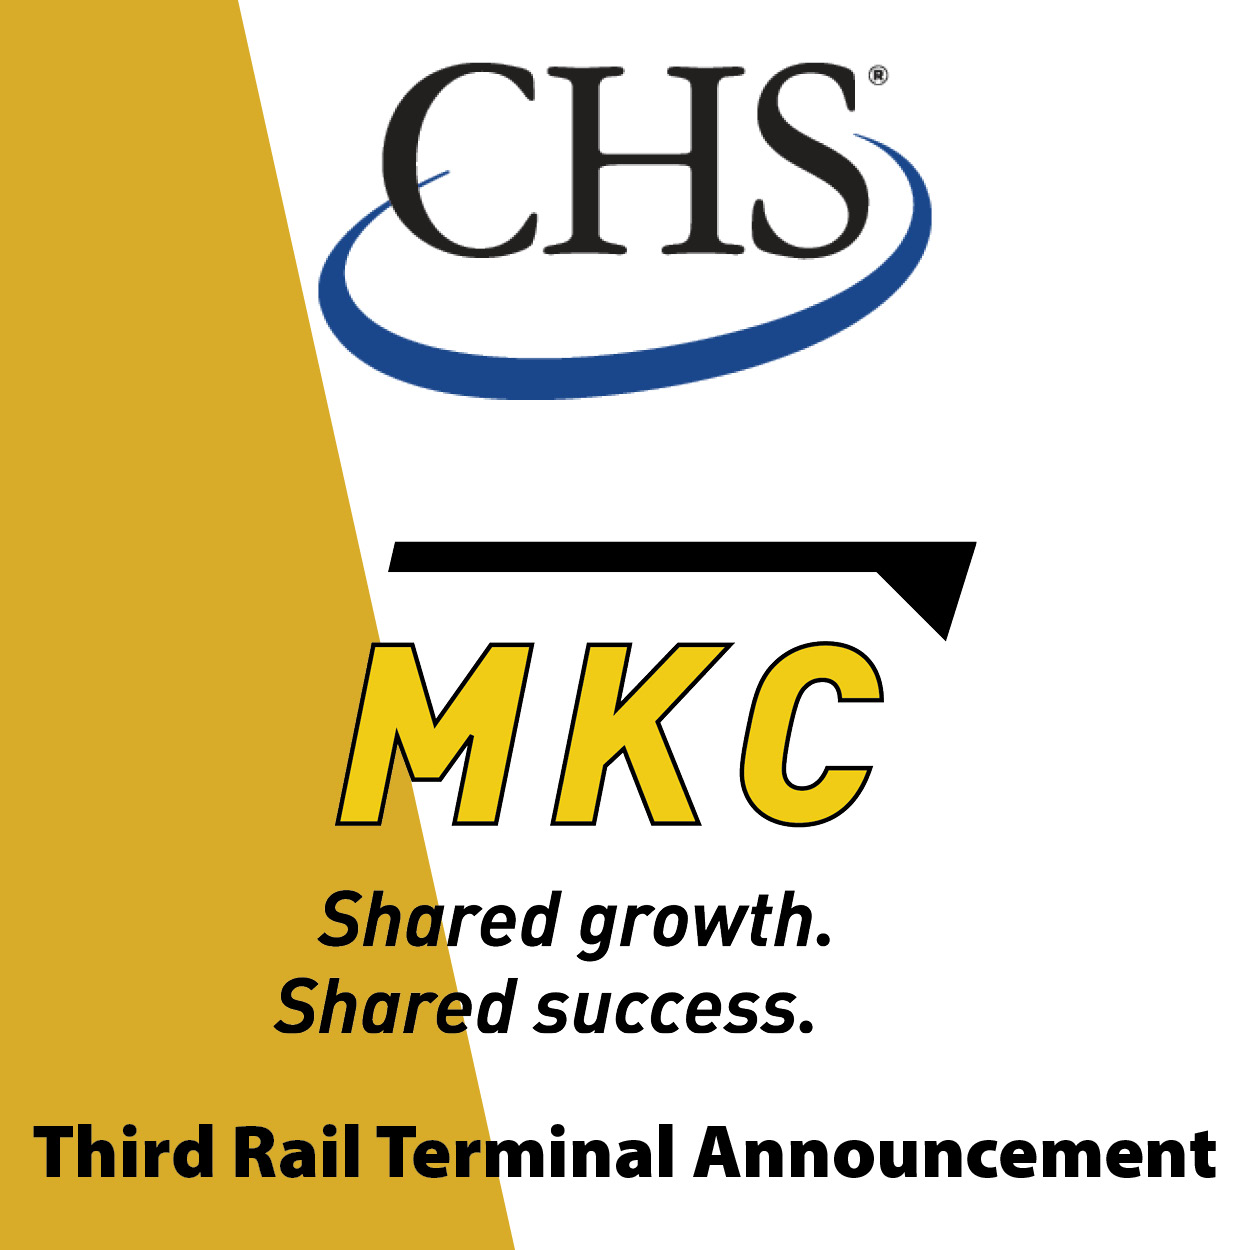 mkc-chs-news-release-image